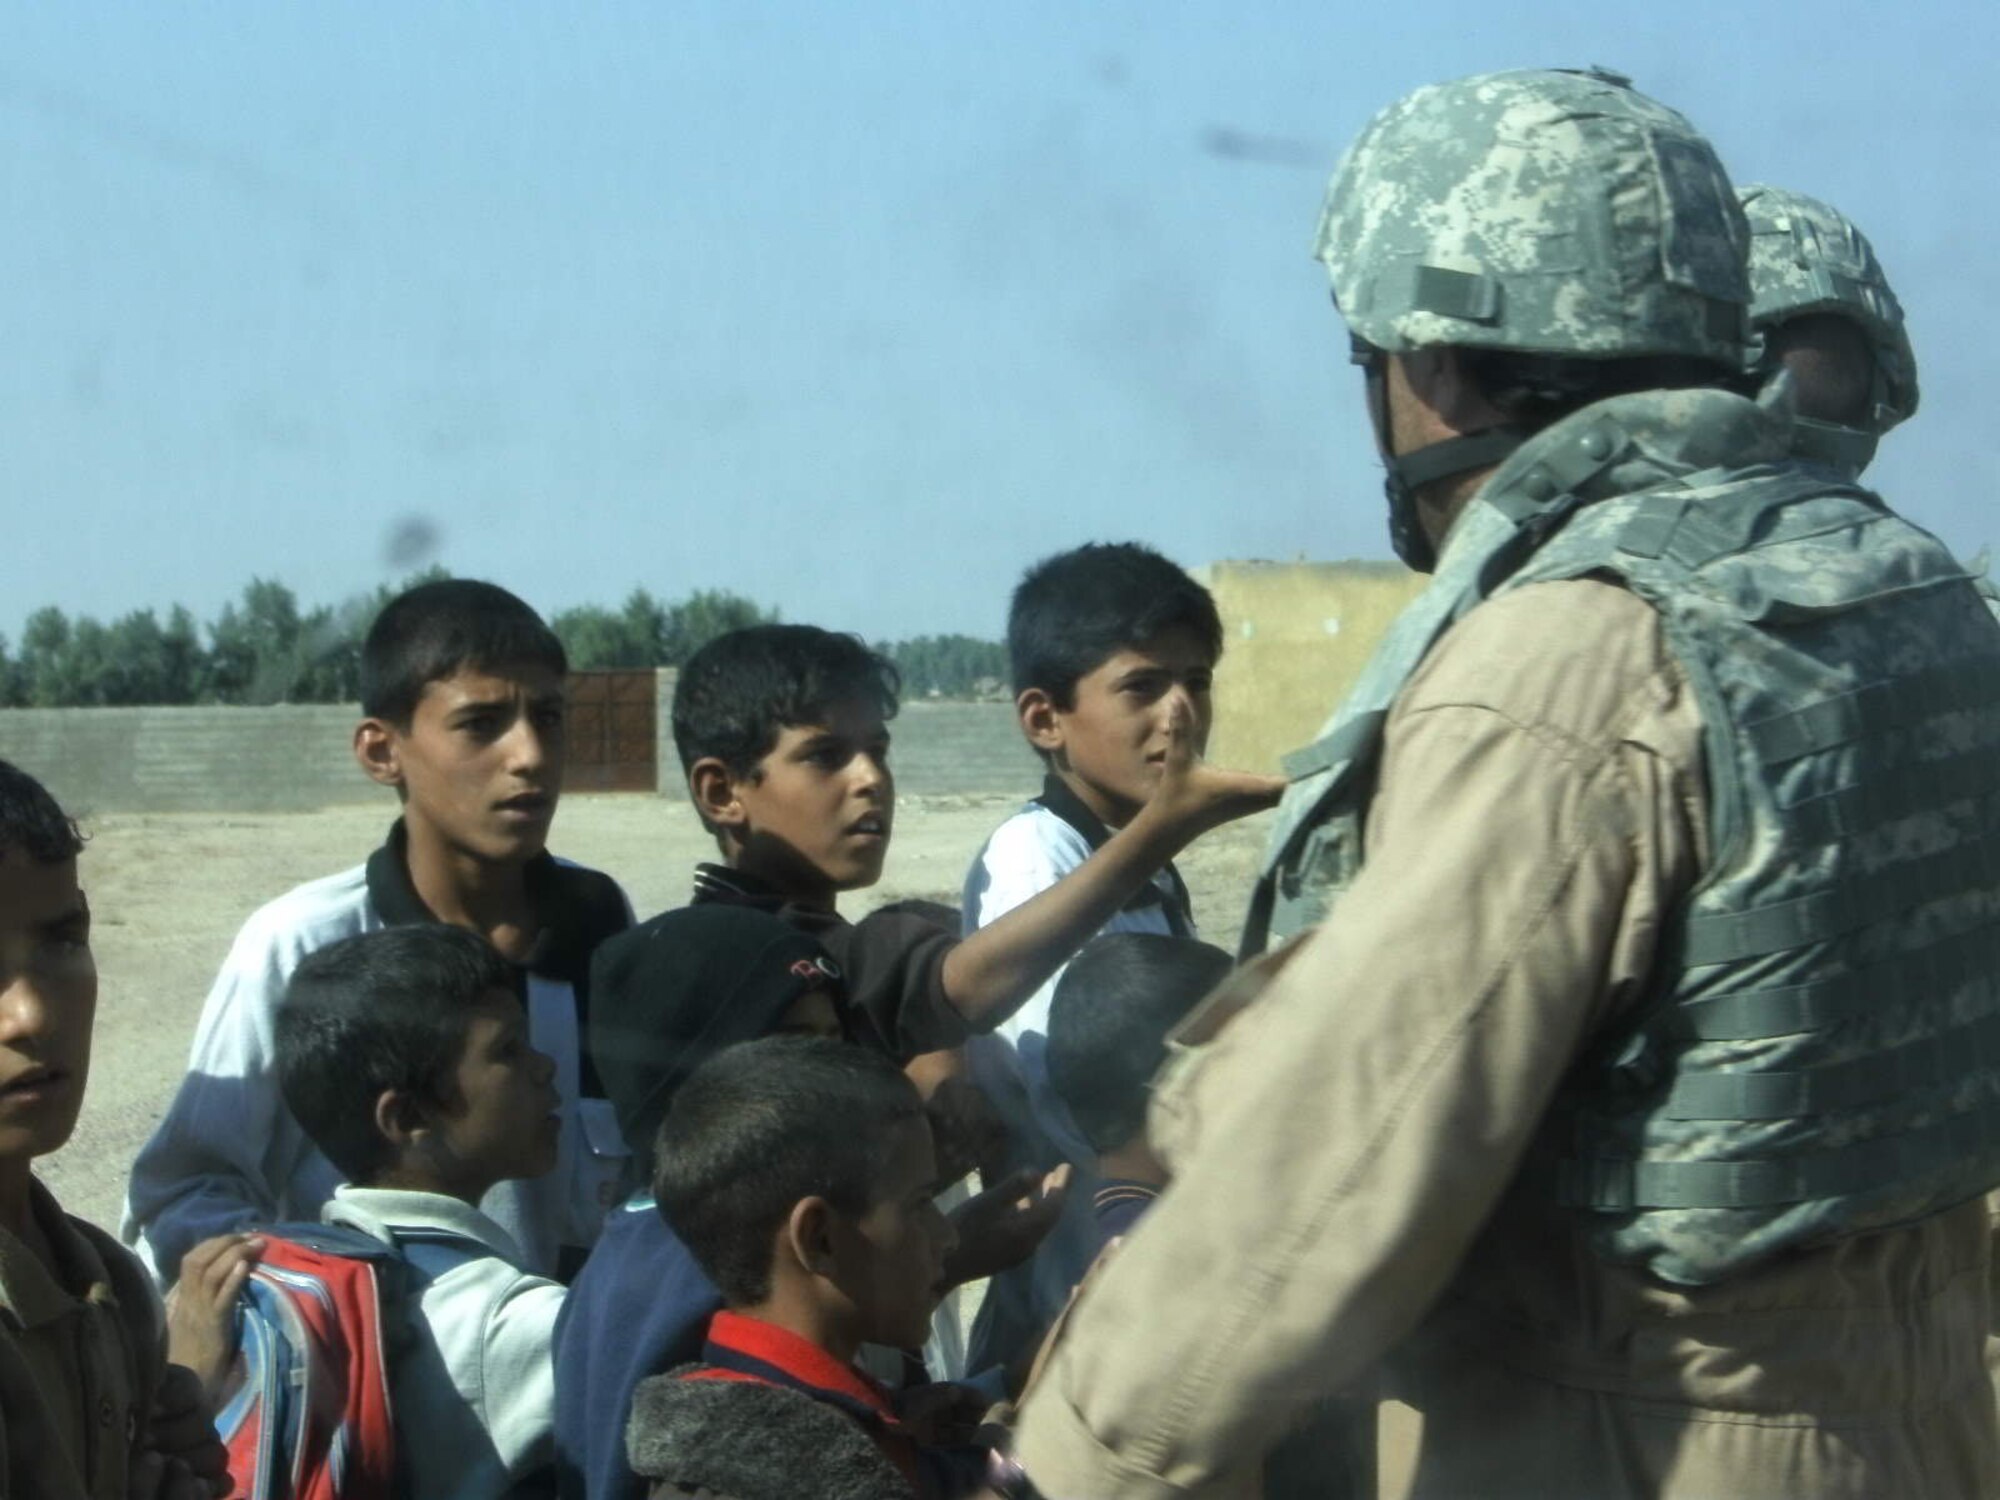 Members of Malmstrom's 341st and 741st Missile Security Forces Squadron routinely brought goodwill items to Iraqi children while conducting combat missions outside the wire during their deployment to Camp Bucca. (U.S. Air Force courtesy photo)